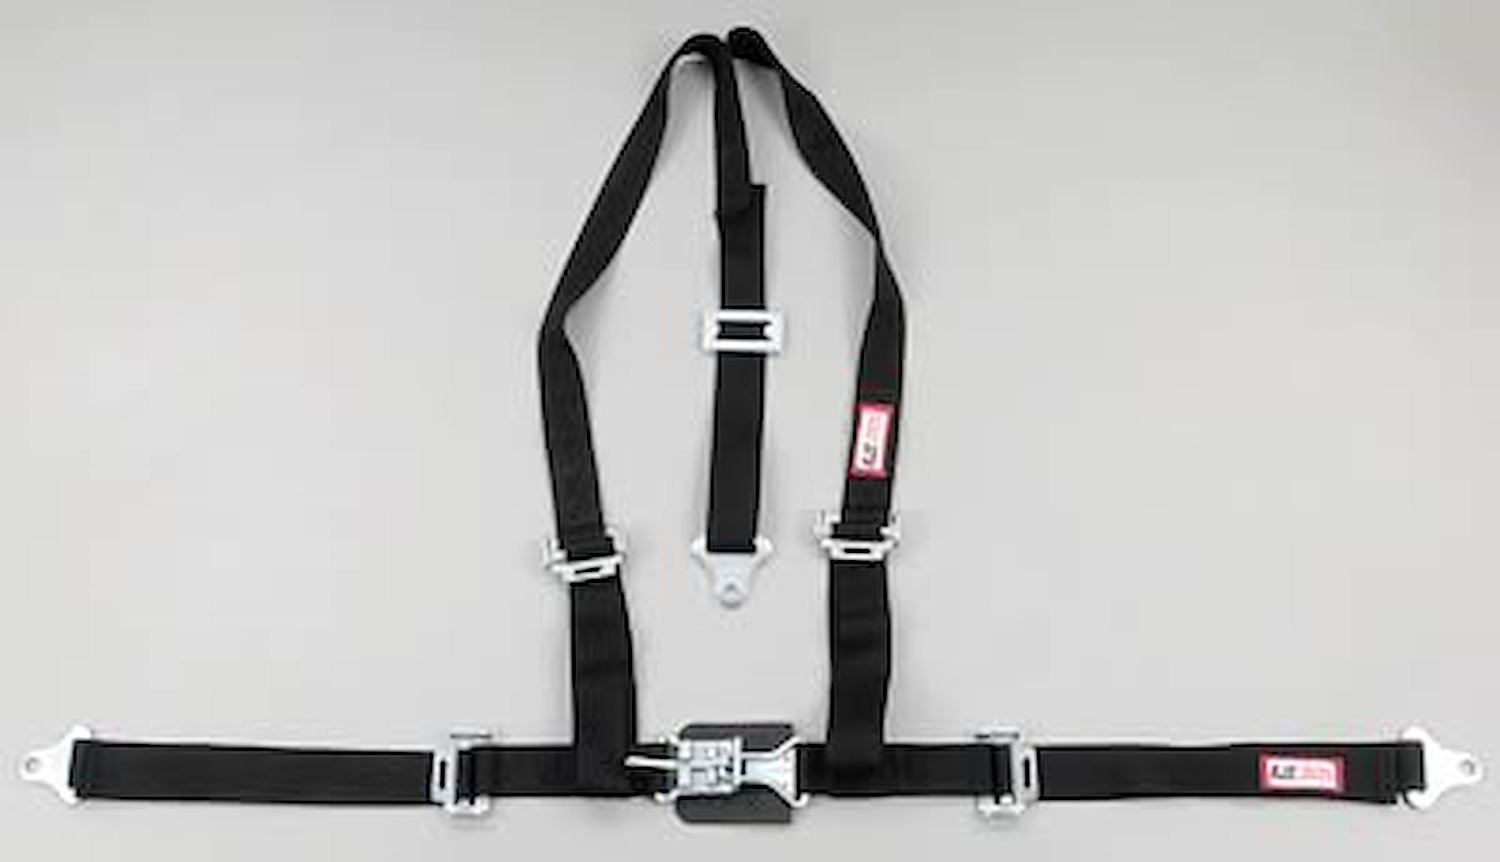 NON-SFI L&L HARNESS 3 PULL DOWN Lap Belt SEWN IN 2 S.H. Individual FLOOR Mount w/STERNUM STRAP ALL WRAP ENDS RED